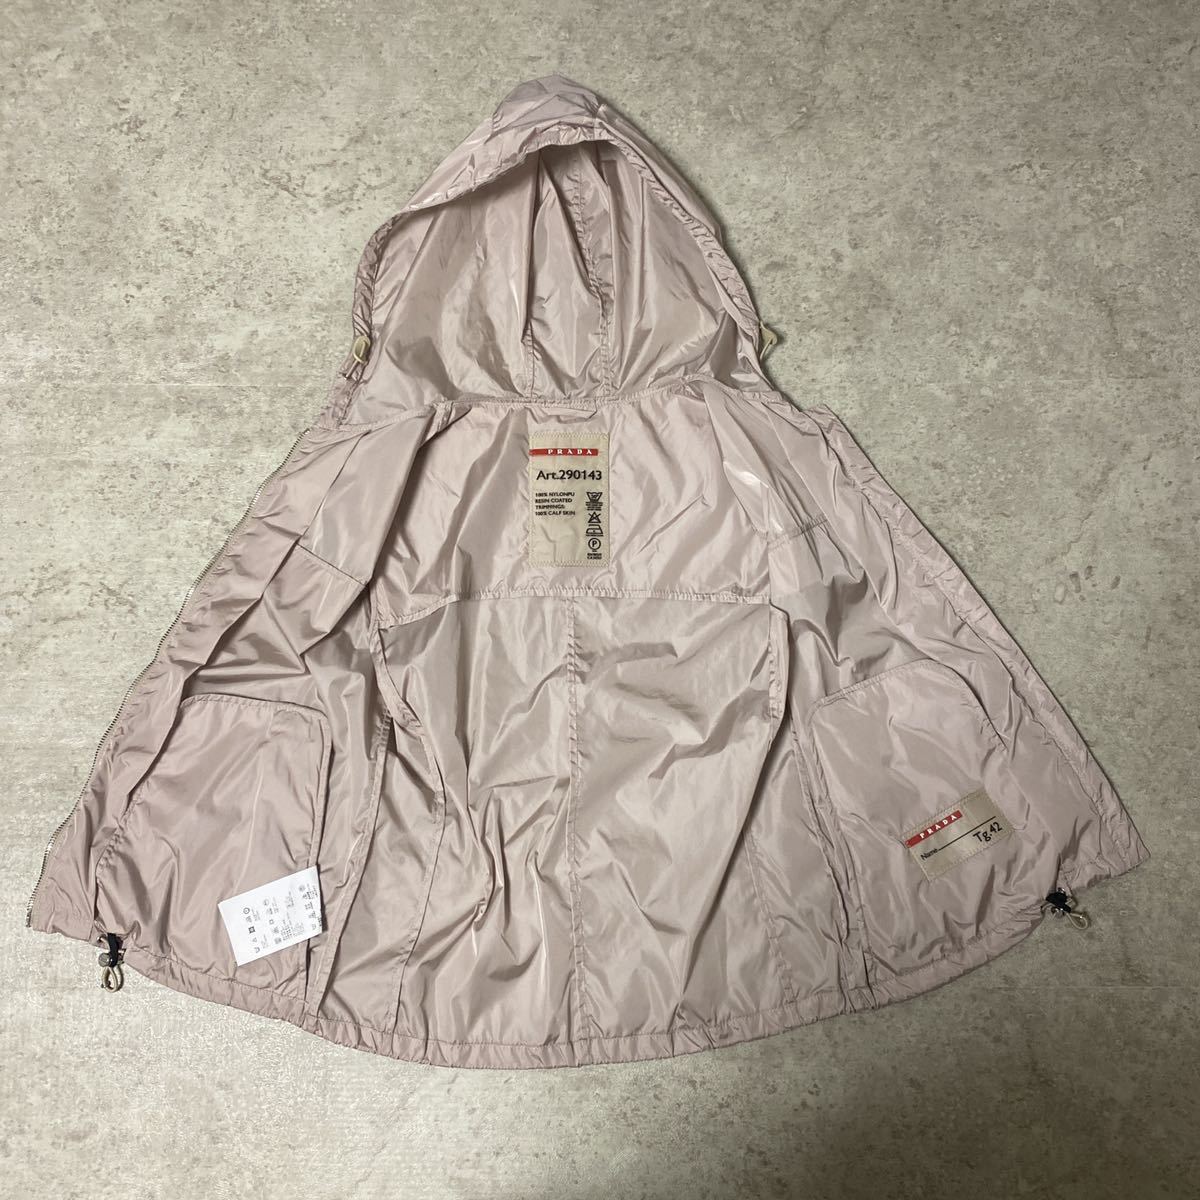 90s 00s archive vintage prada sport PRADA nylon vest アーカイブ プラダスポーツ ナイロンベスト  miu miu MIUMIU 三角ロゴ helmut product details Proxy bidding and ordering  service for auctions and shopping within Japan and